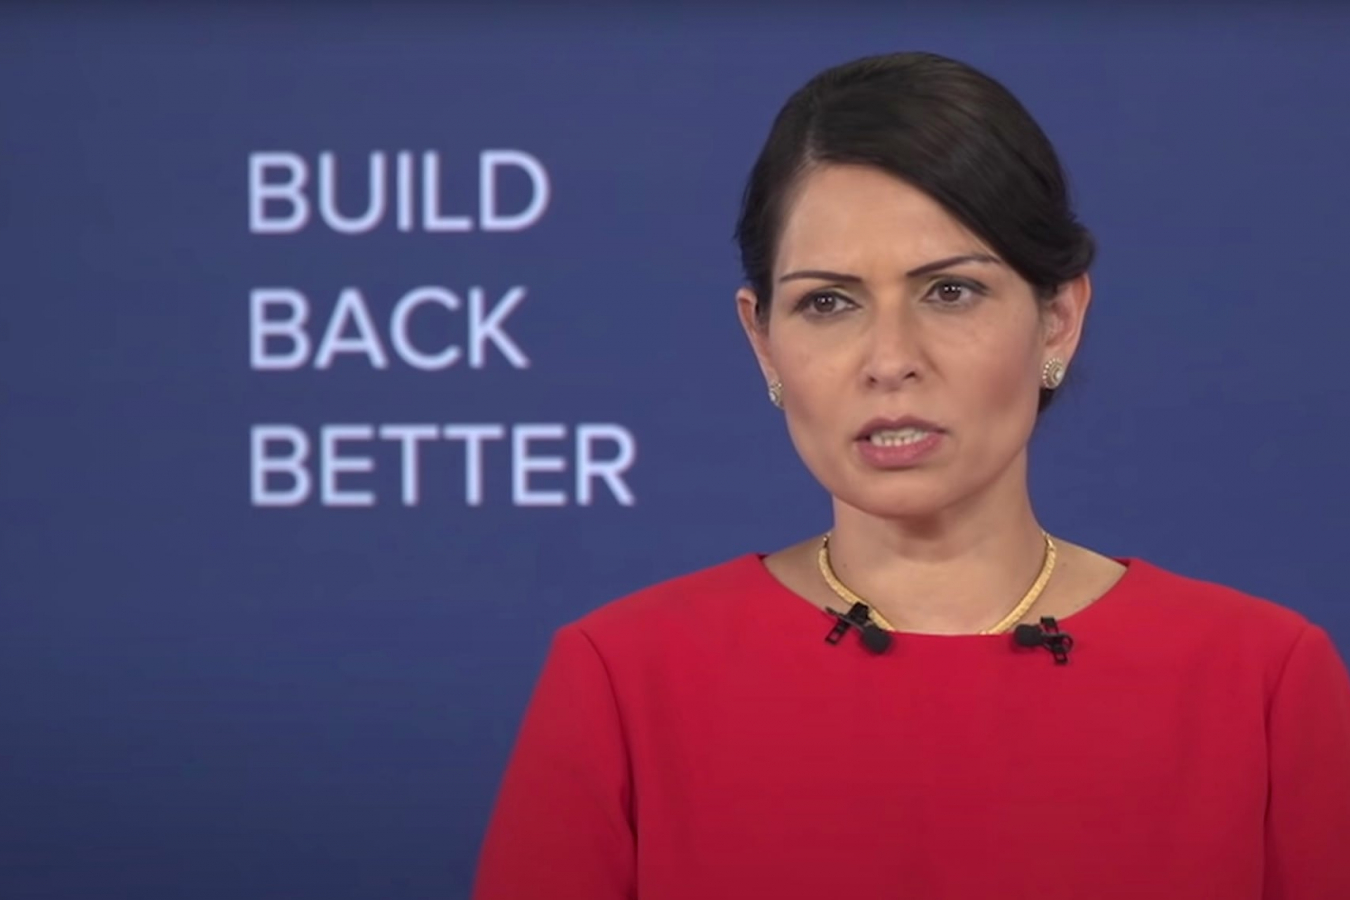 Priti Patel gave keynote speech at Tory Party Conference 4 October 2020